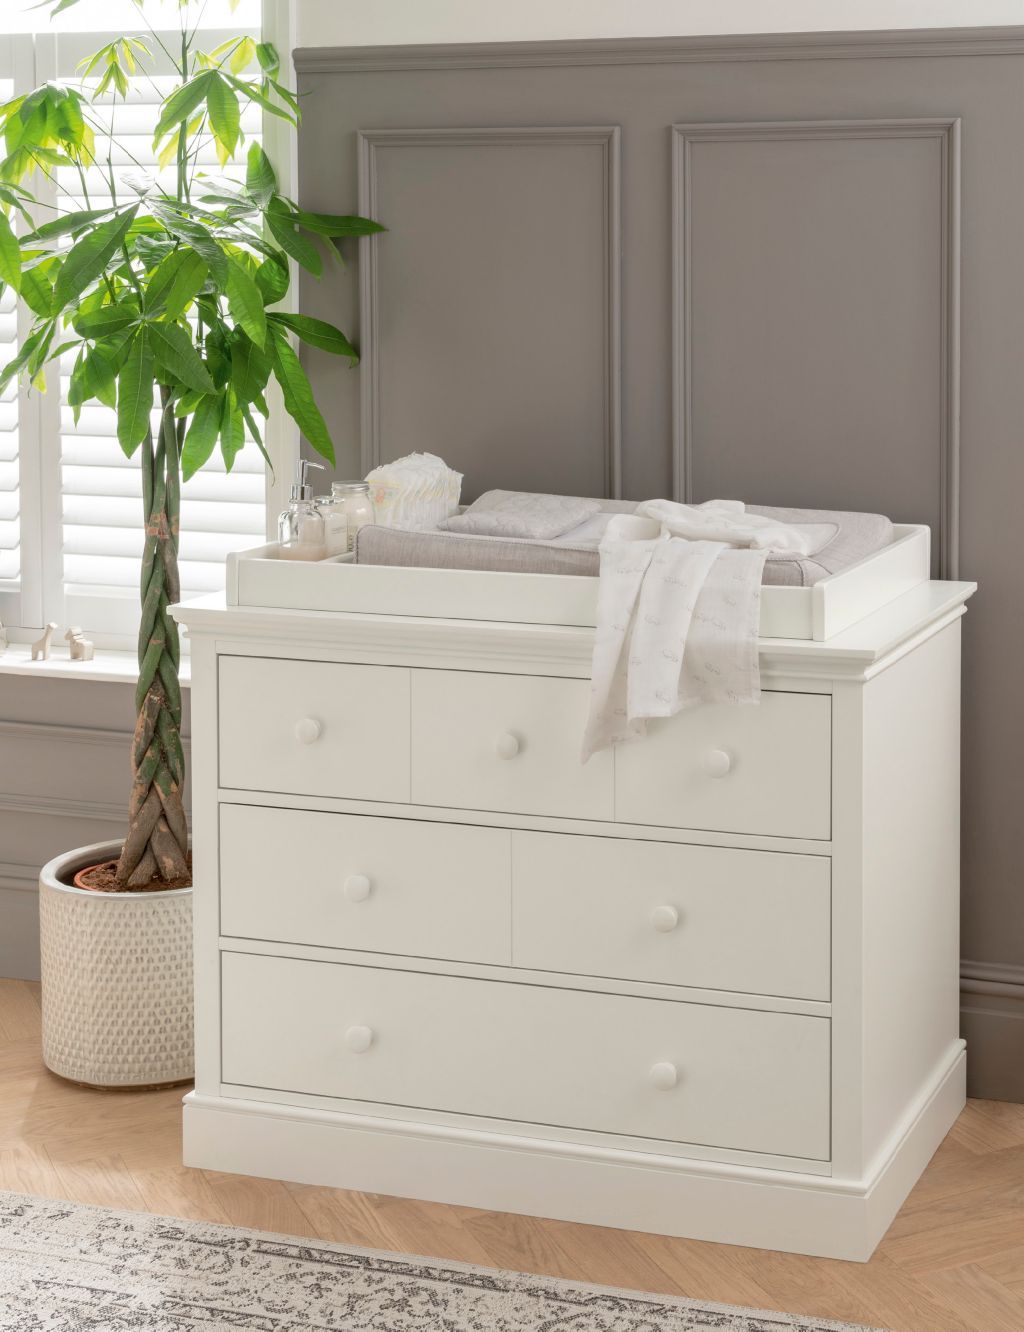 Oxford 2 Piece Cotbed Set with Dresser image 6